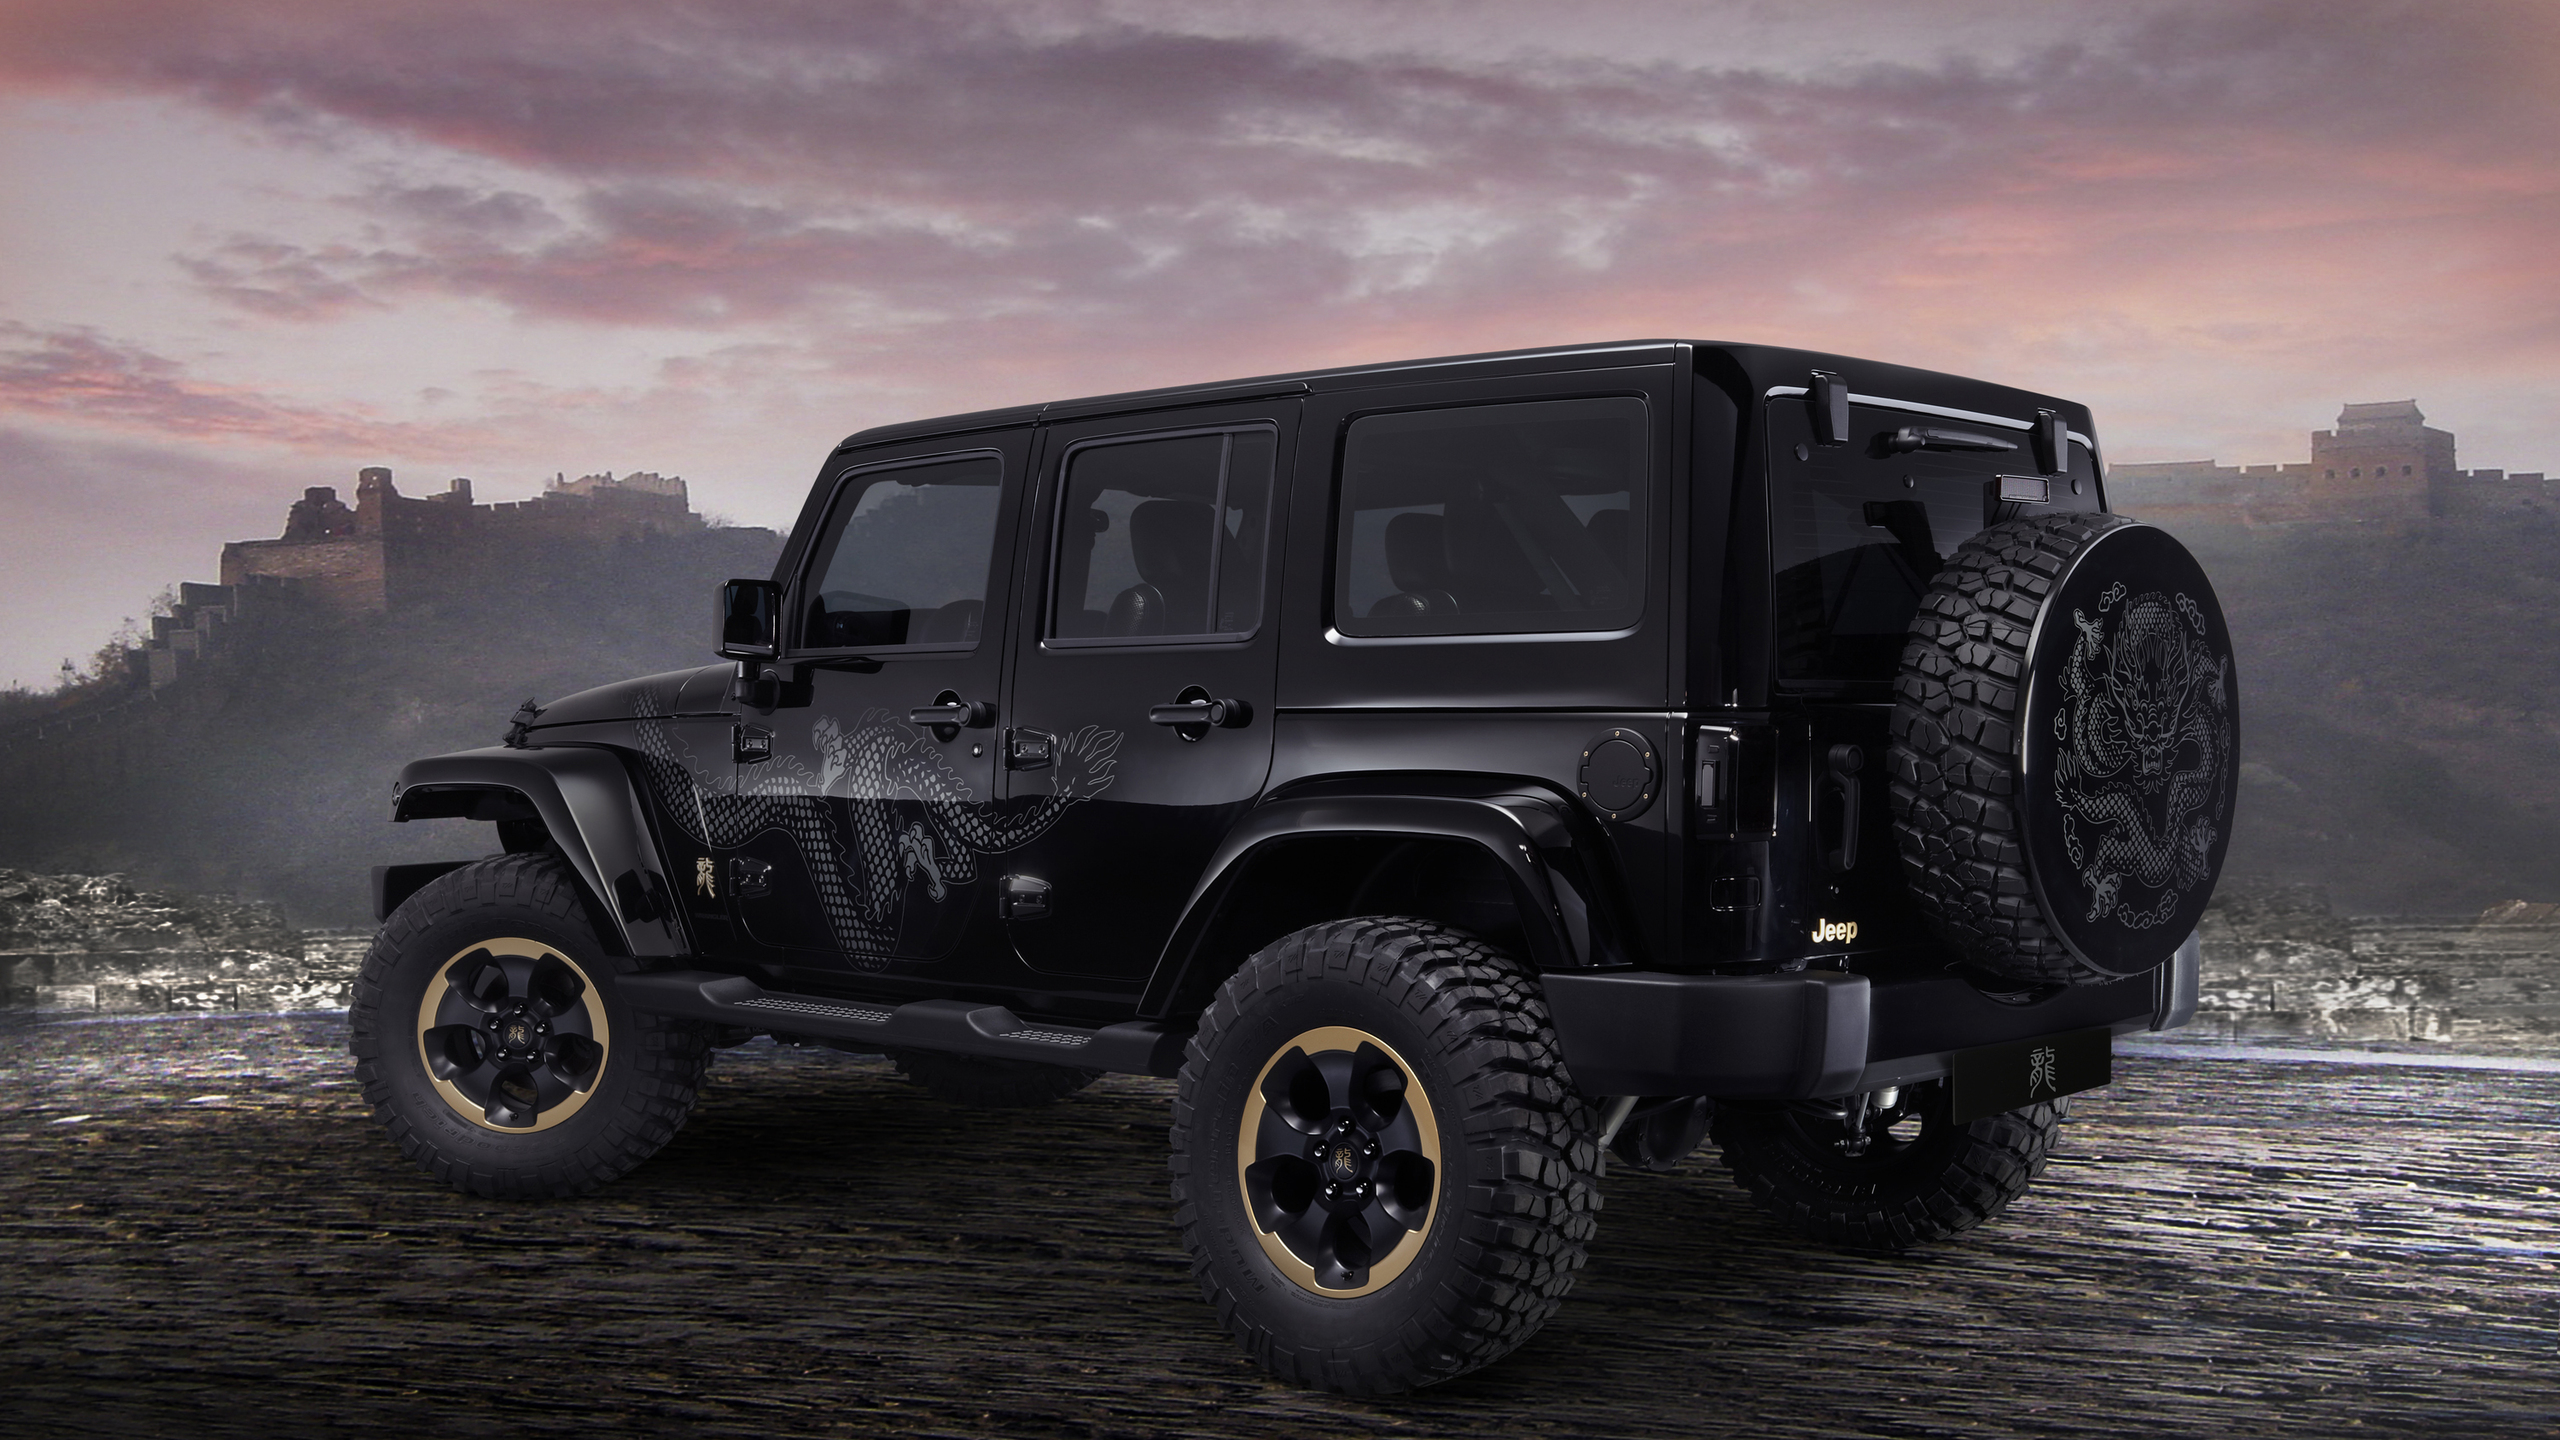 2560x1440 Jeep Wrangler 4k 1440p Resolution Hd 4k Wallpapers Images Backgrounds Photos And Pictures